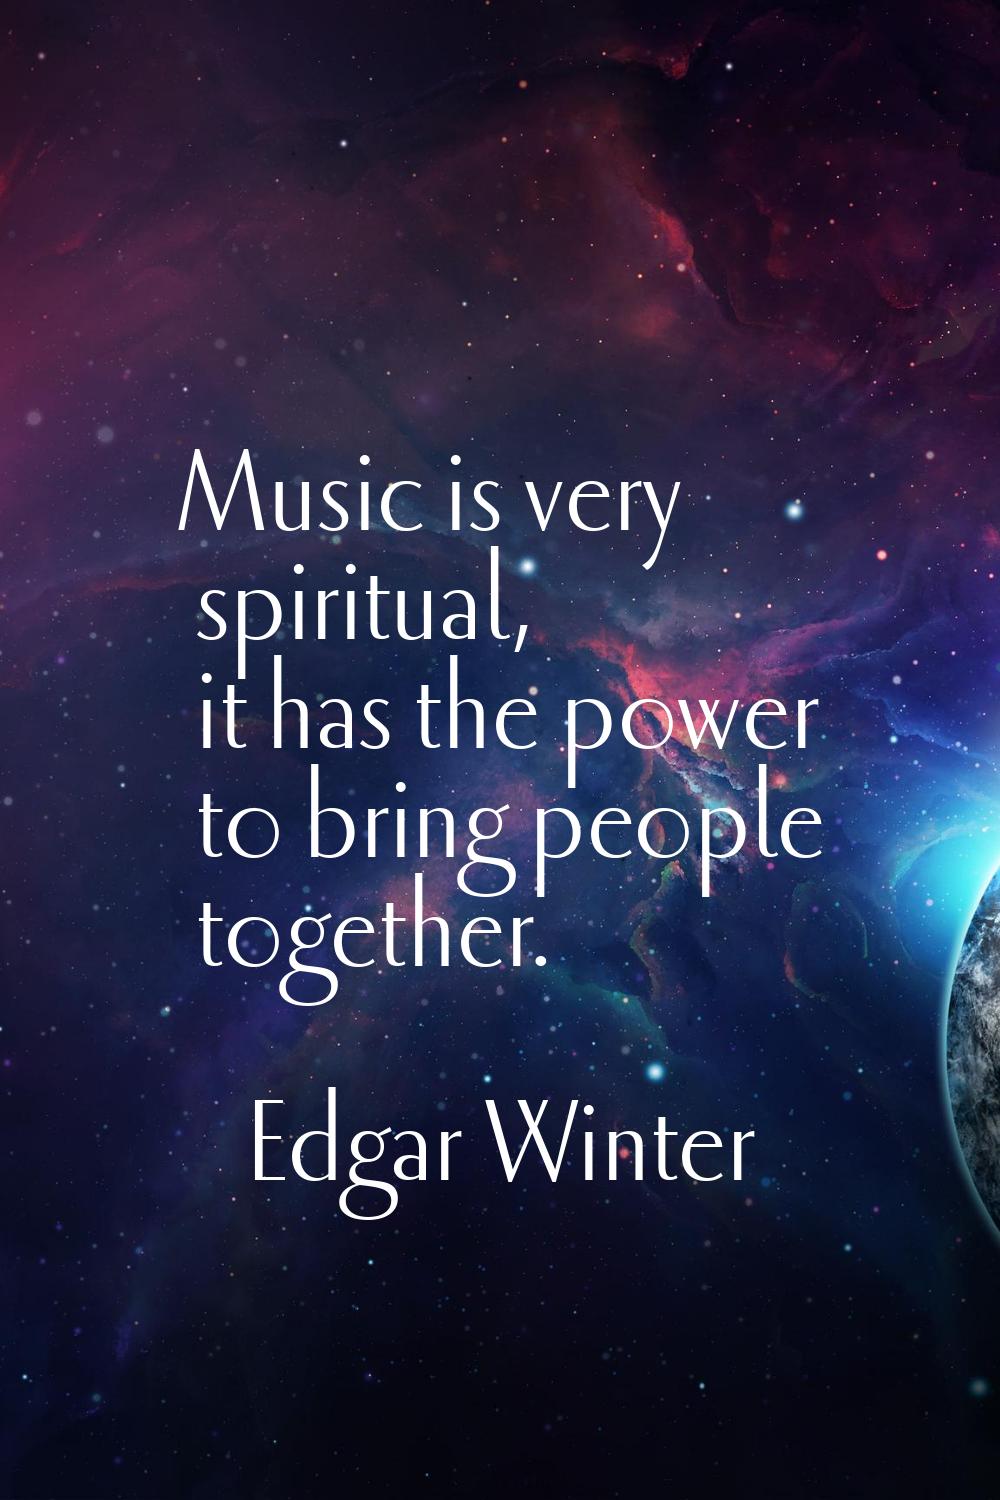 Music is very spiritual, it has the power to bring people together.